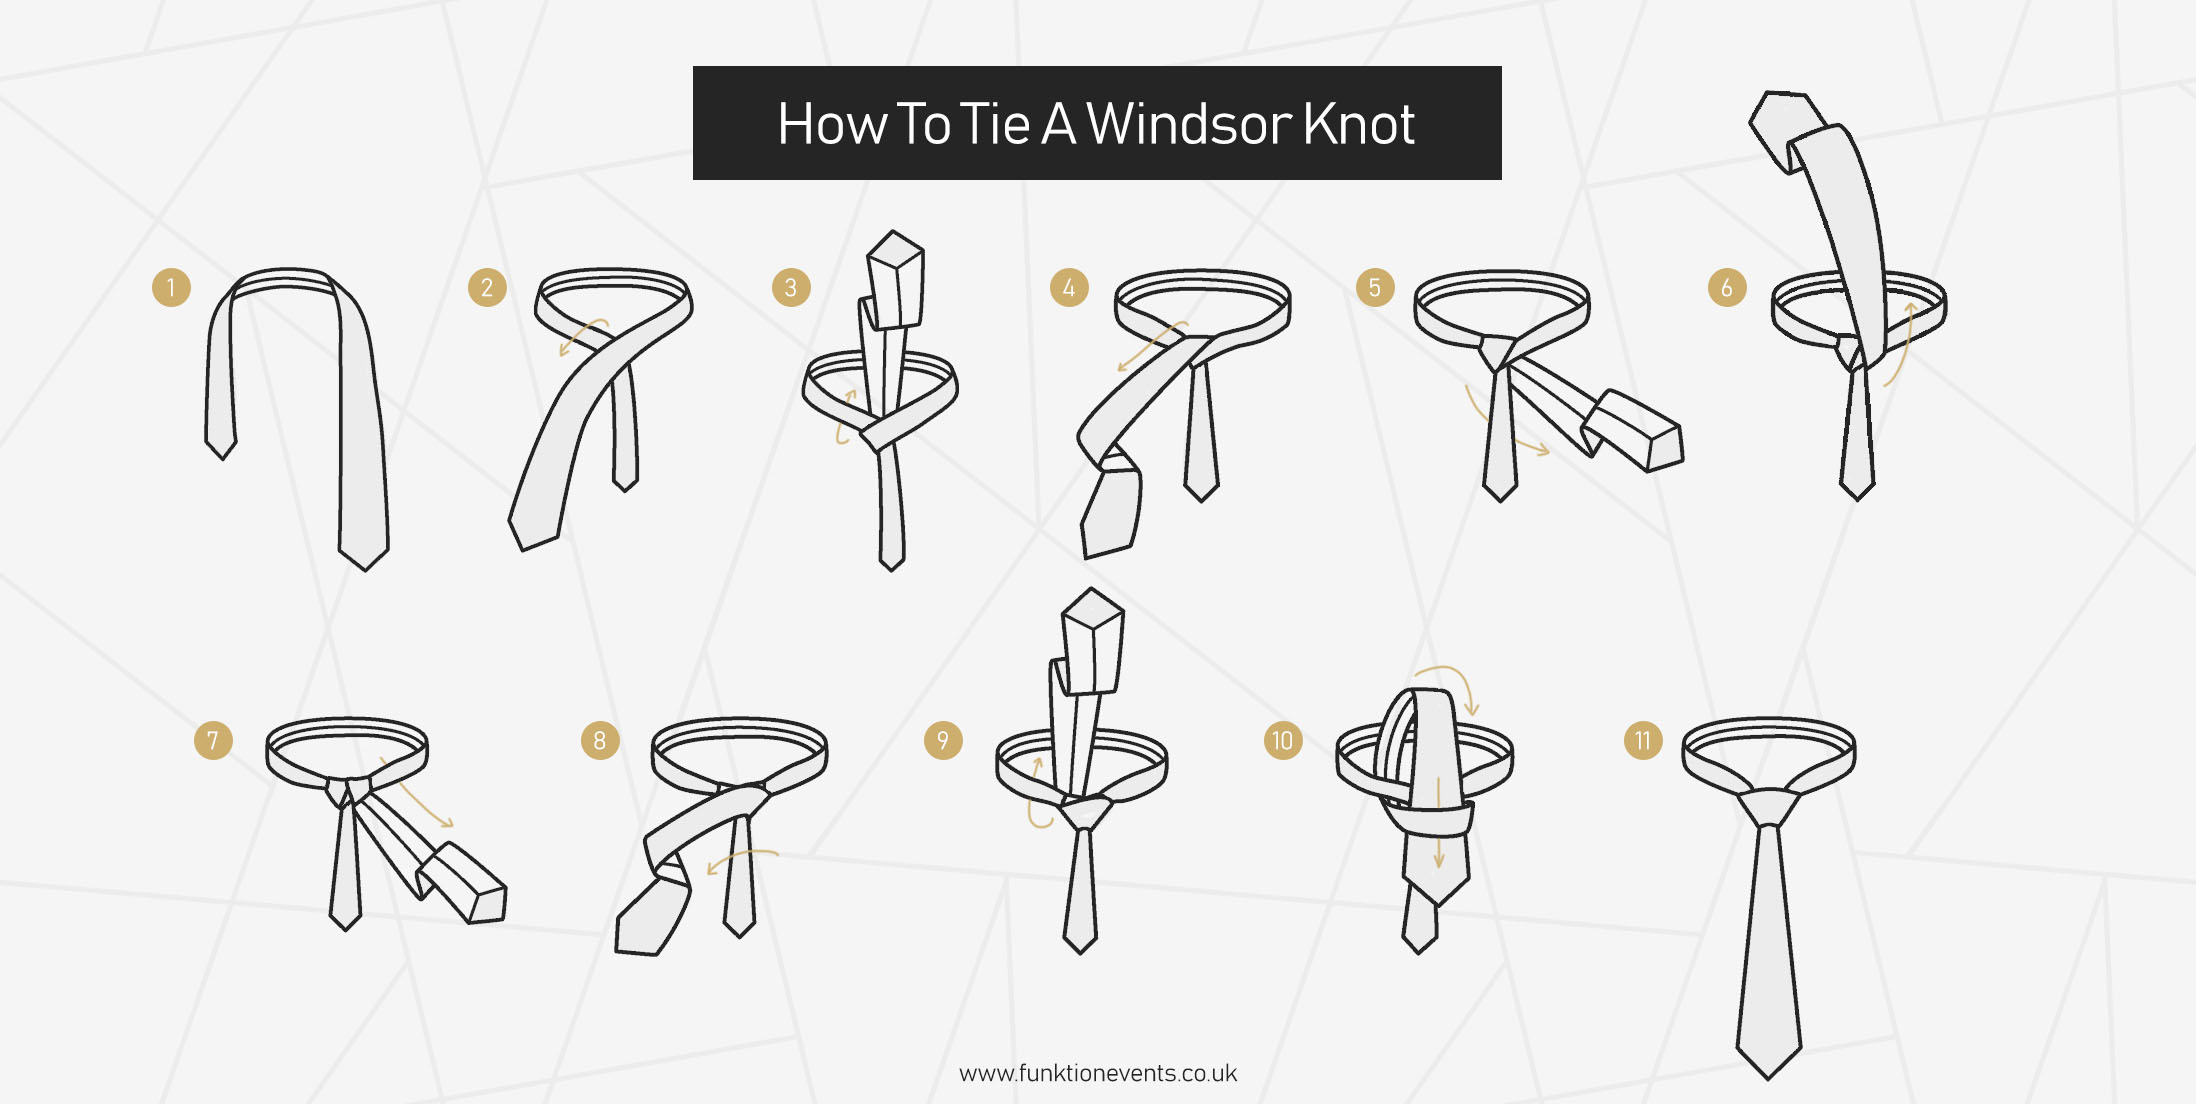 Steps For How To Tie A Windsor Knot